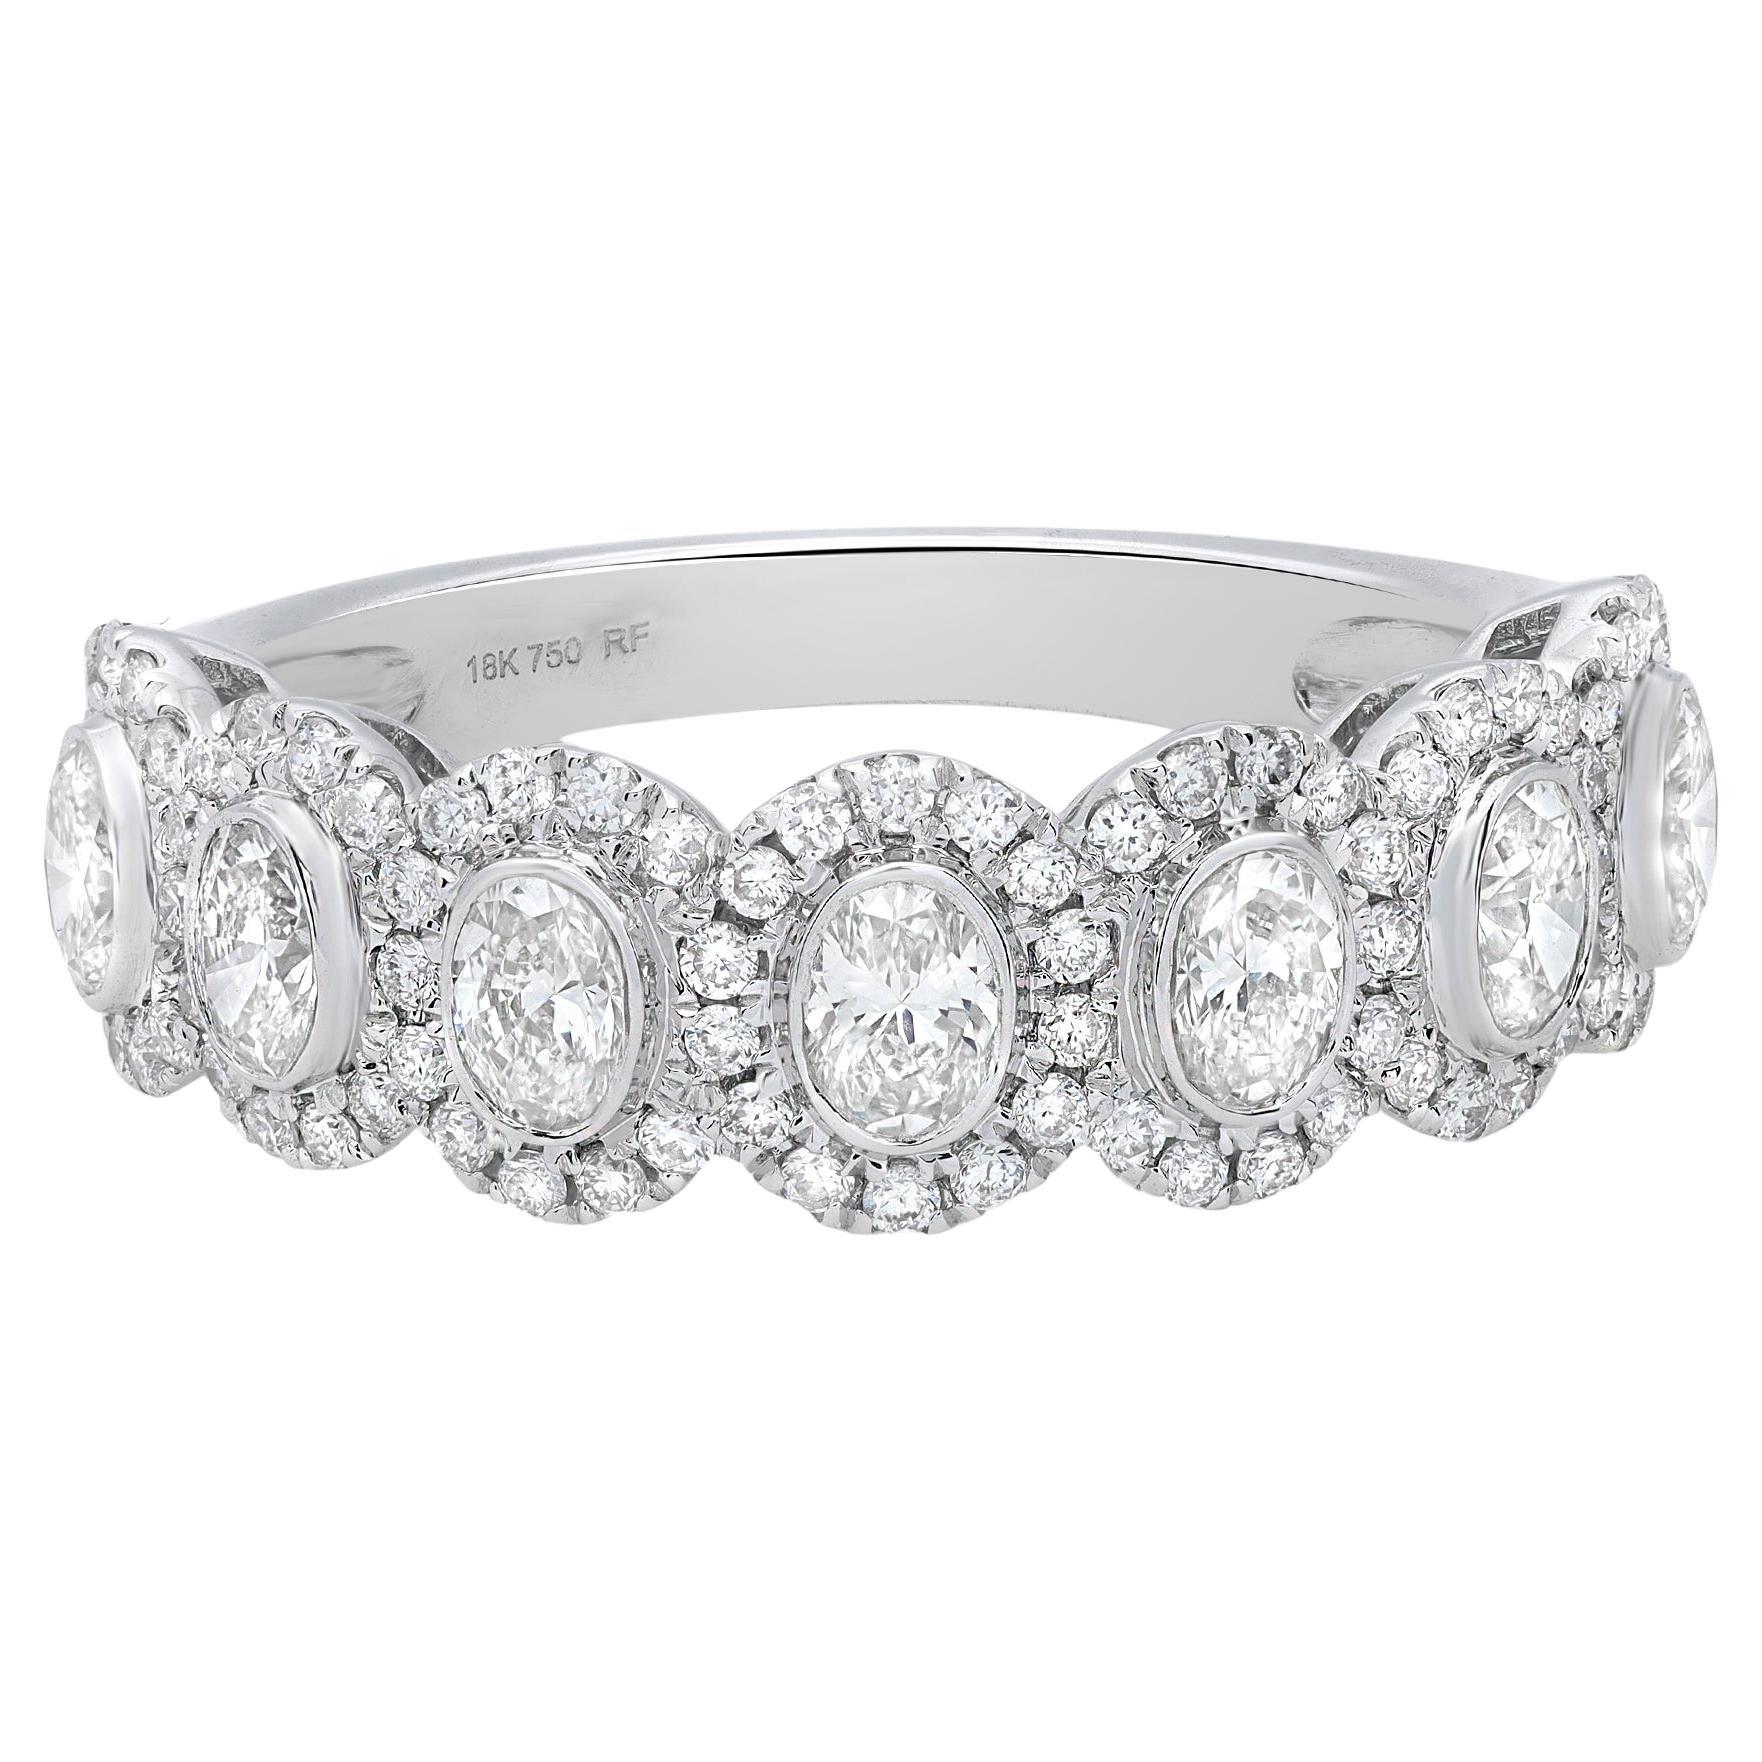 1,33Cttw Oval Cut Diamant-Halo-Ehering 18K Weigold Gre 6,5